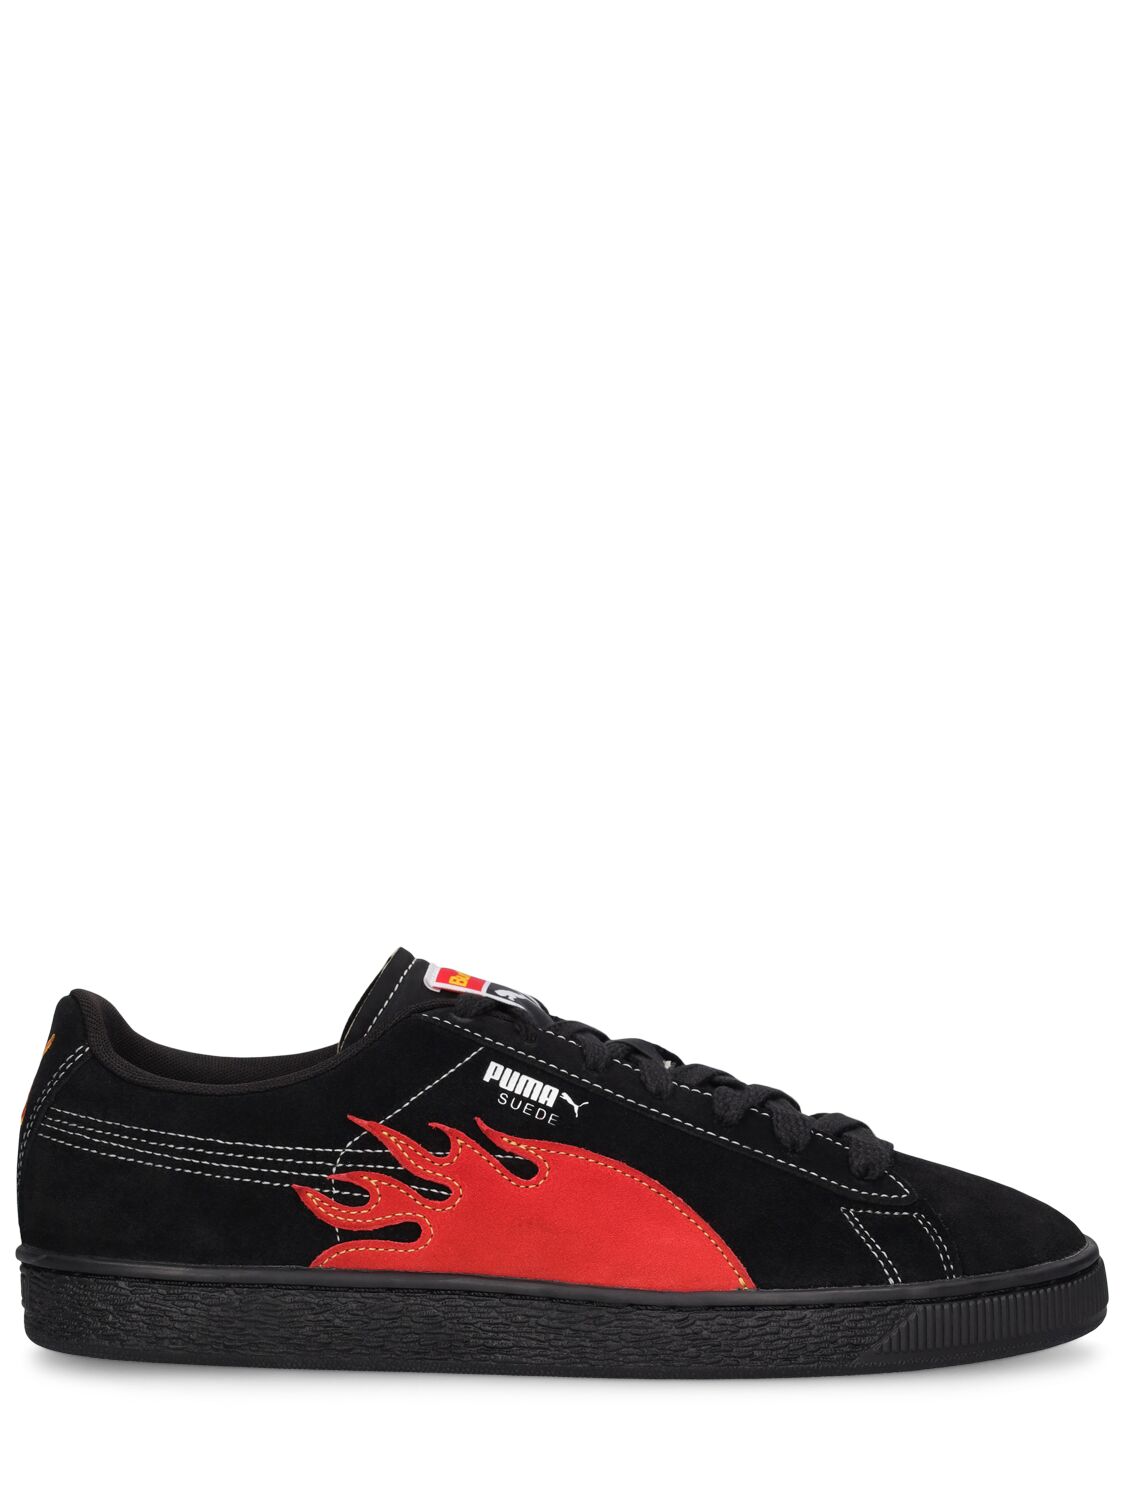 Shop Puma Butter Goods Classic Suede Sneakers In Black,red